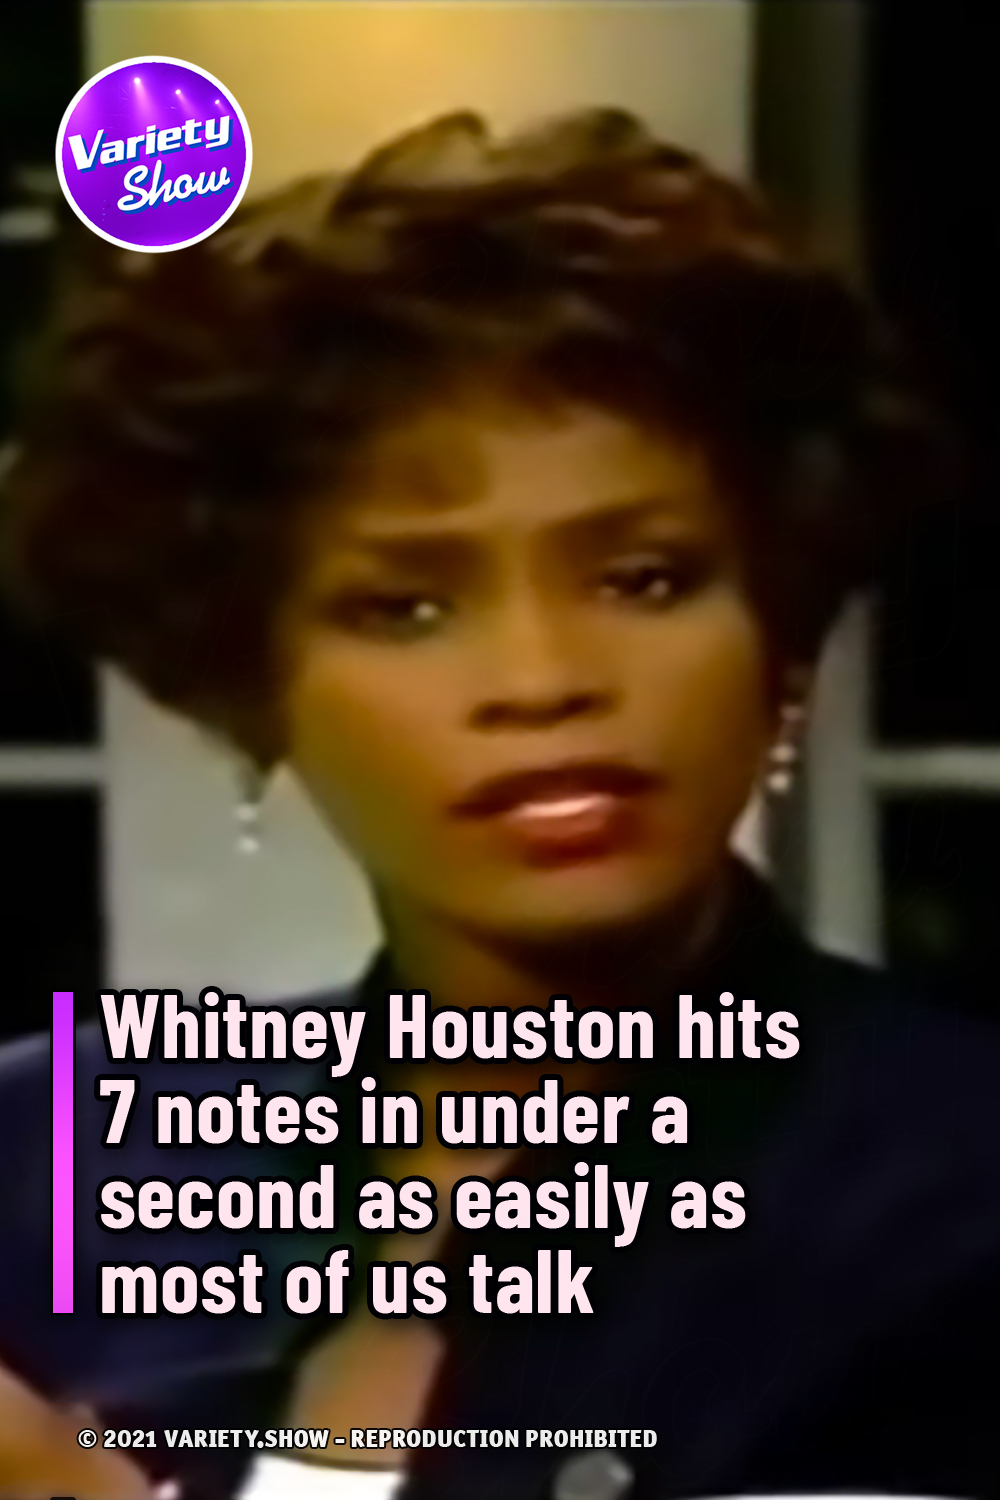 Whitney Houston hits 7 notes in under a second as easily as most of us talk